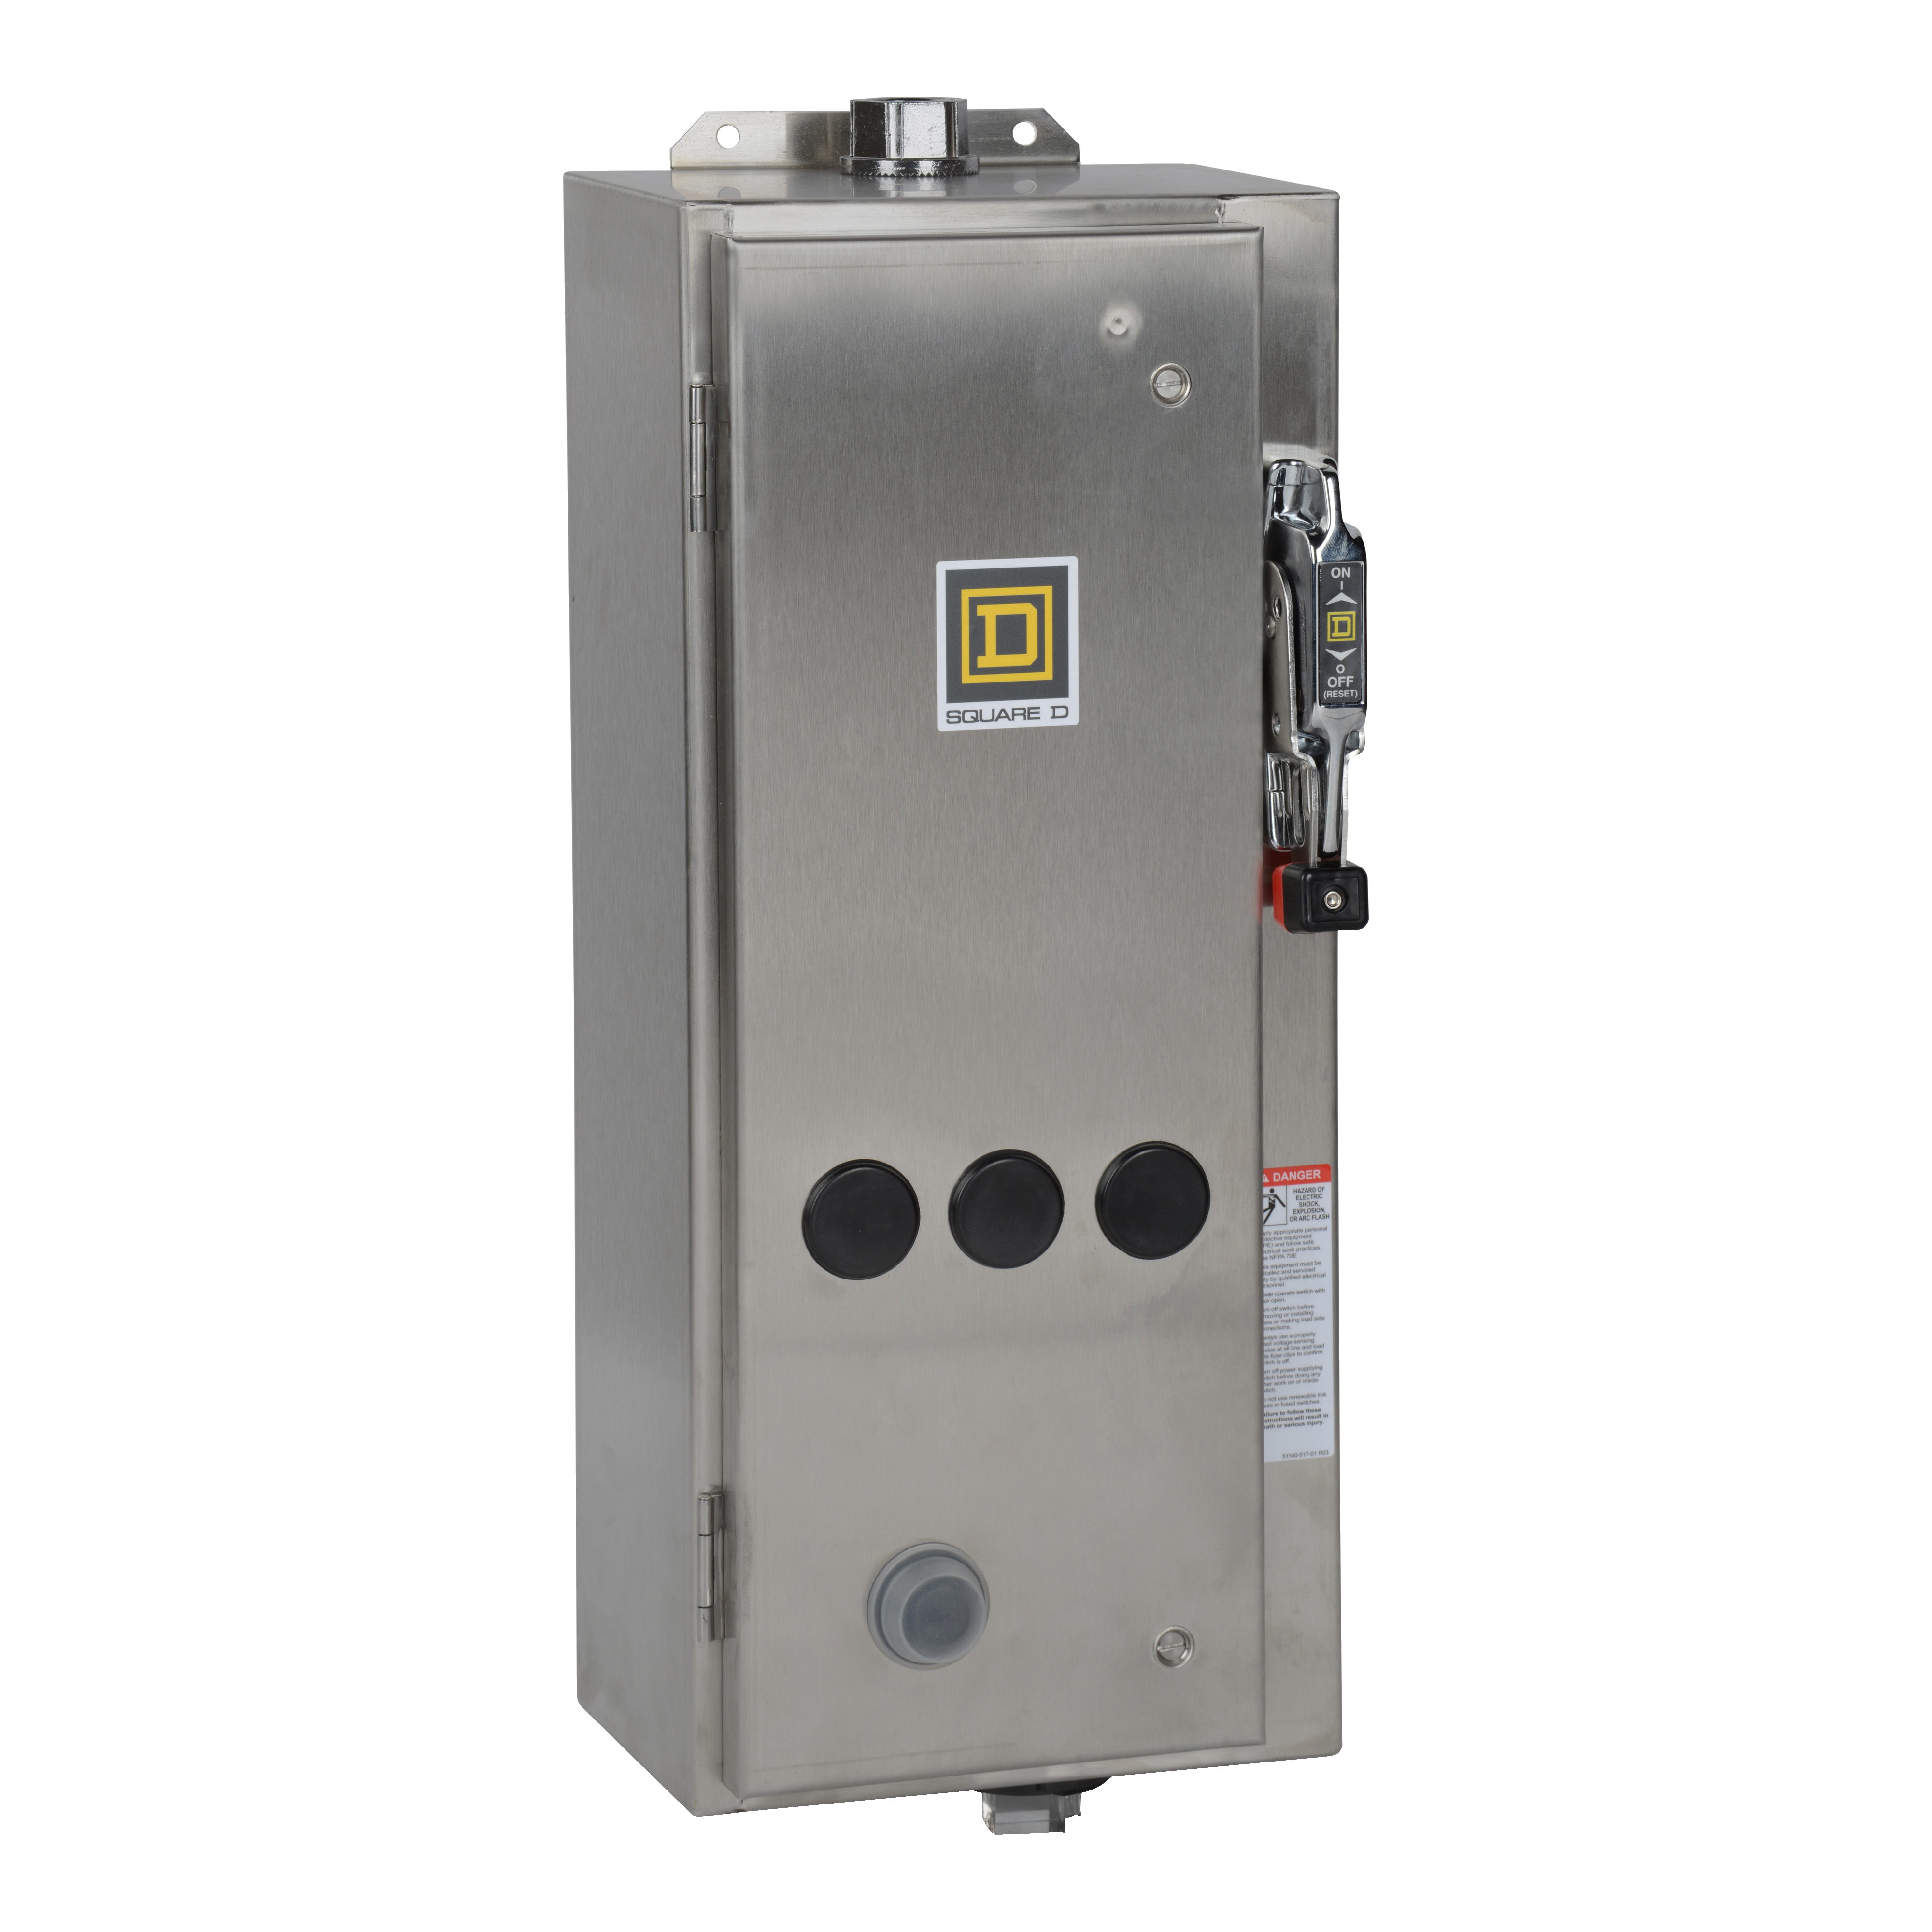 NEMA Combination Starter, Type S, 30A fusible disconnect, Size 0, 18A, 1 HP at 120VAC single phase, 120VAC coil, NEMA 4X